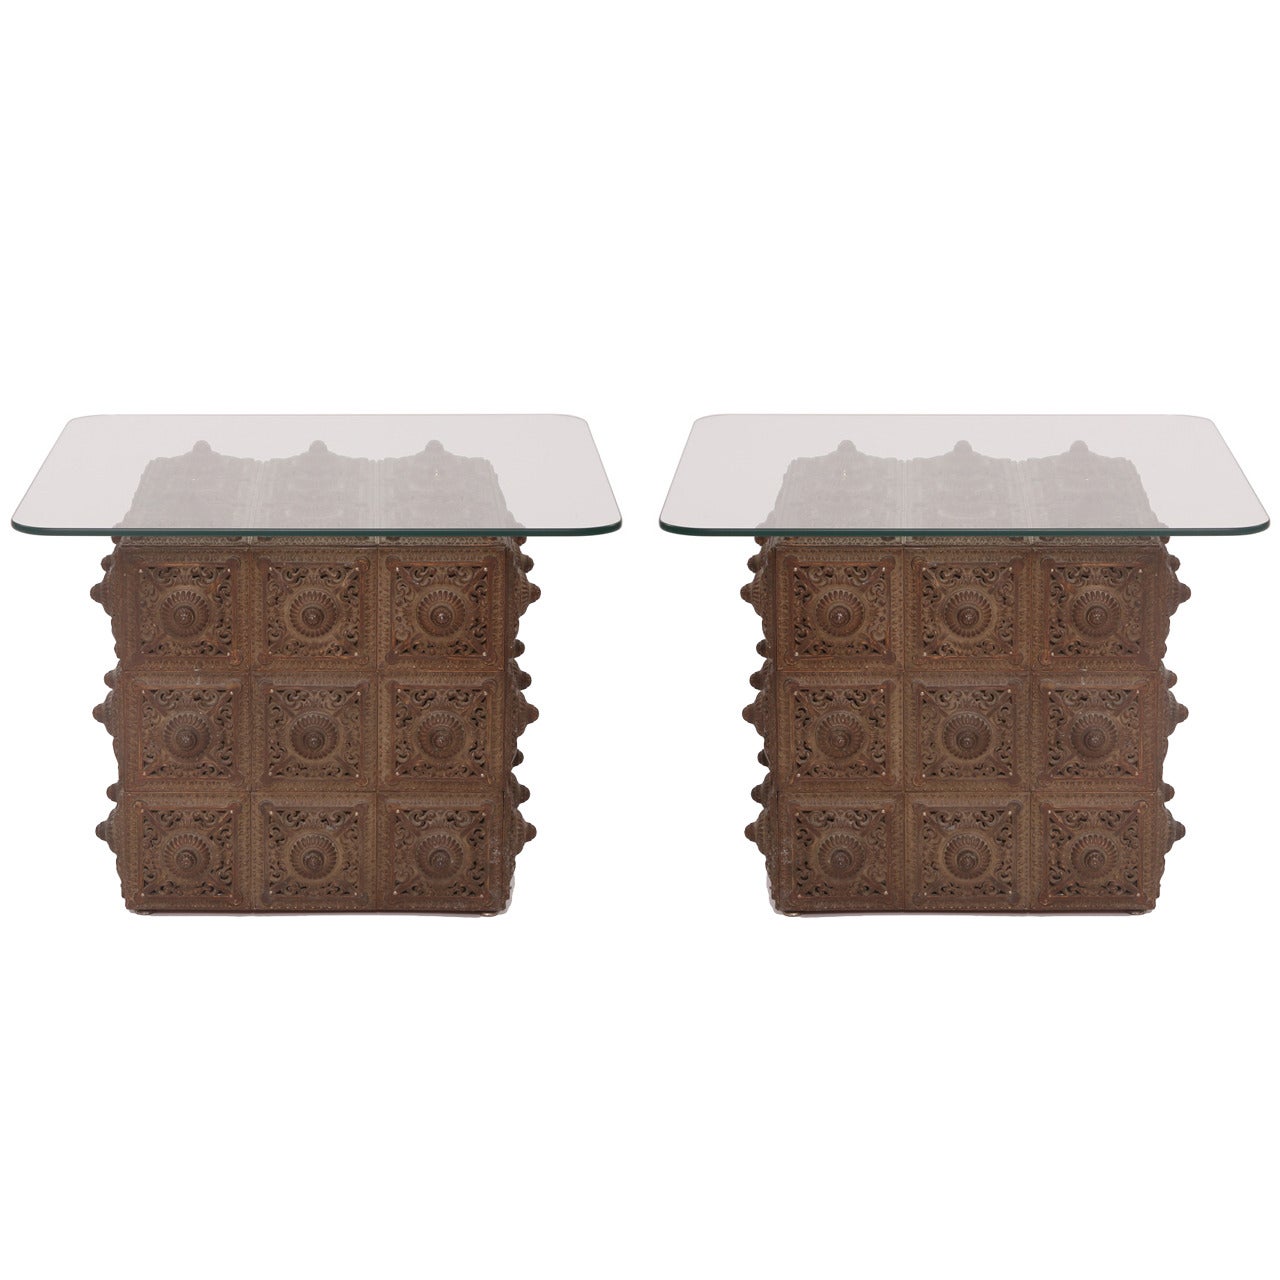 Pair of Highly Decorative Bronze Tables